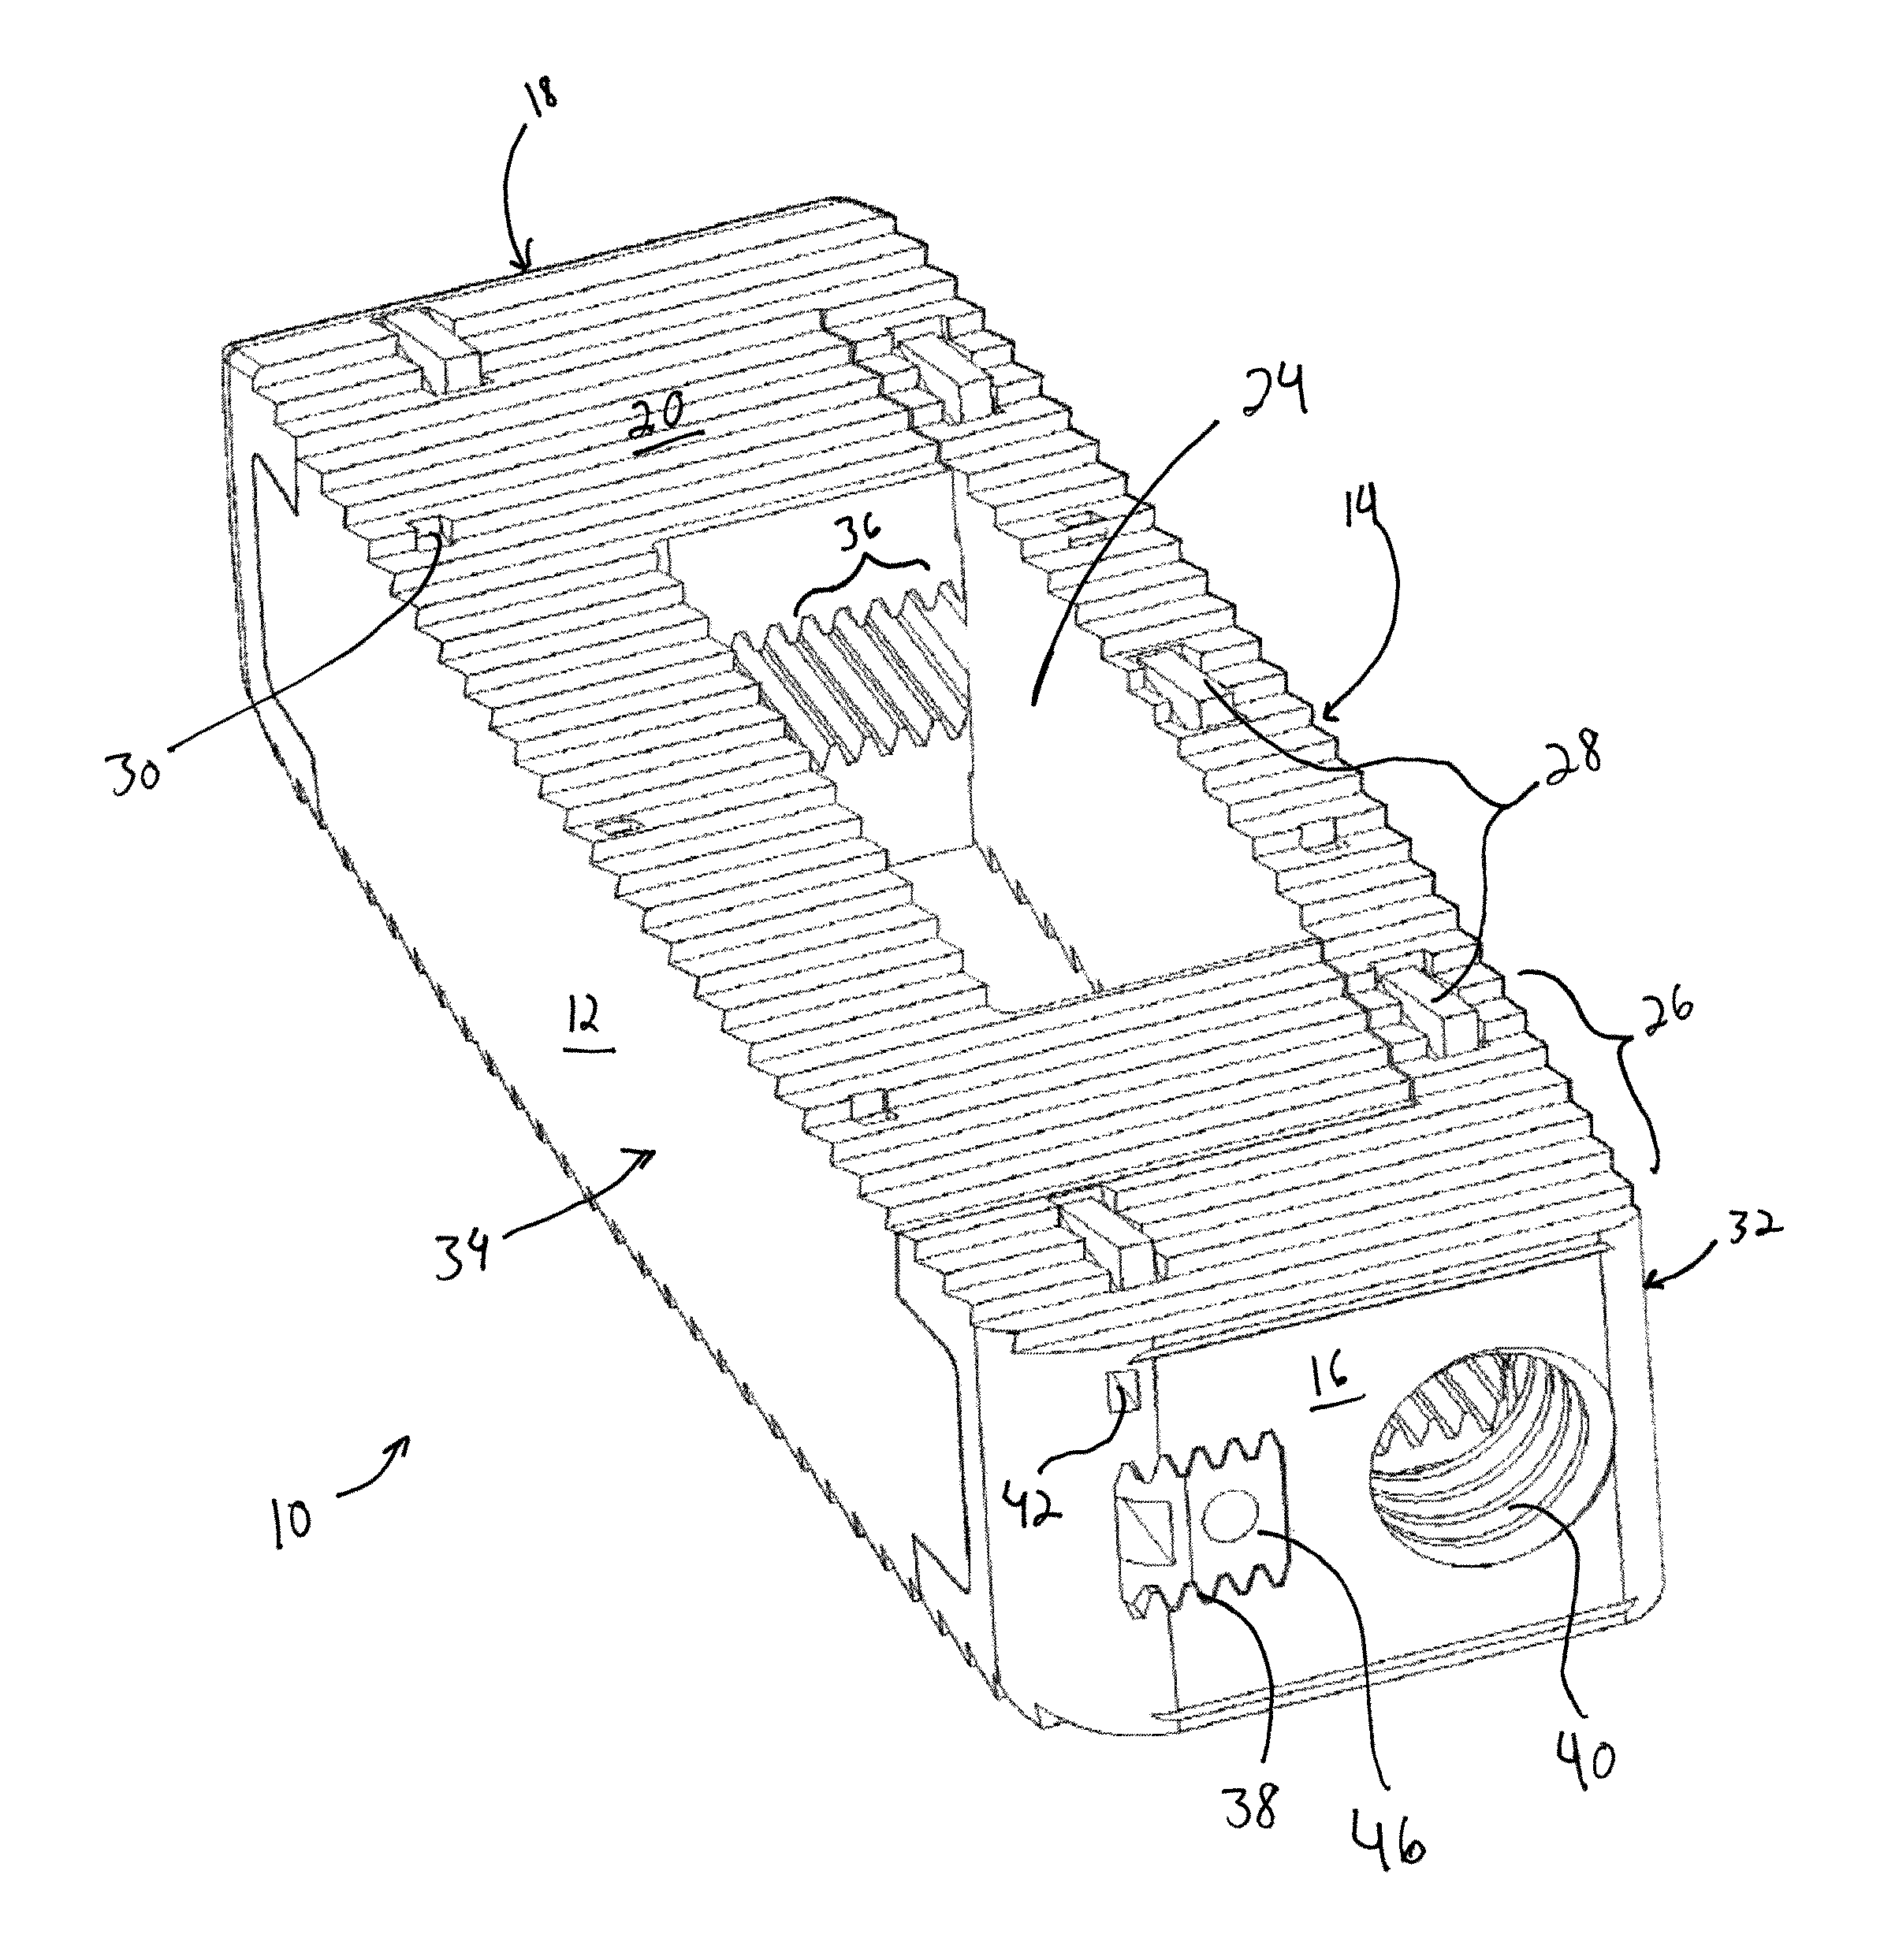 Laterally expandable spinal prosthesis